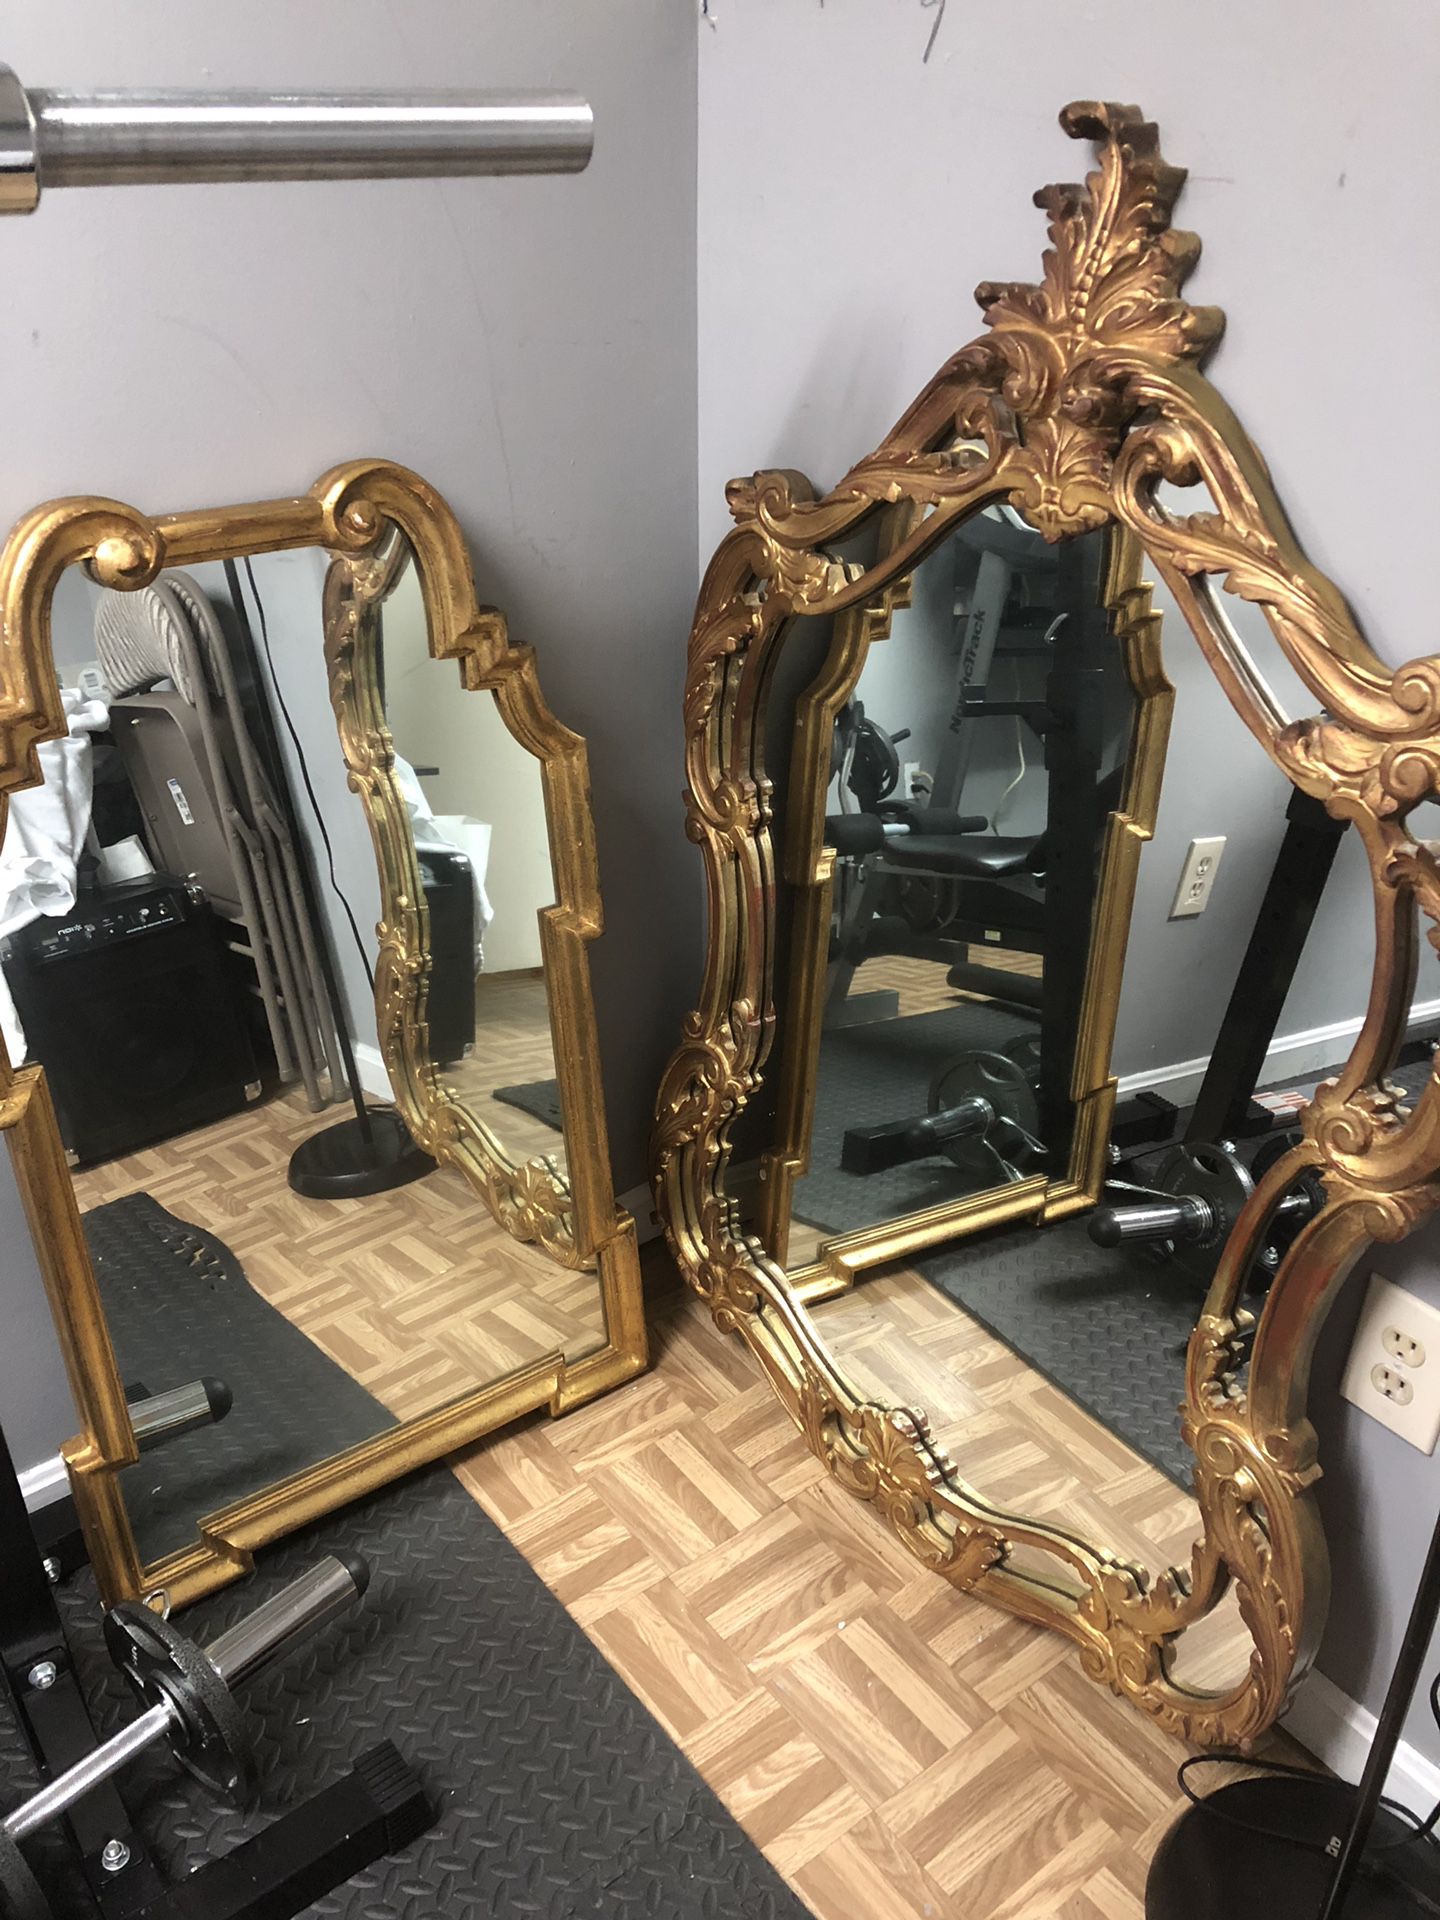 2 Wooden Mirrors ($95 and $125)